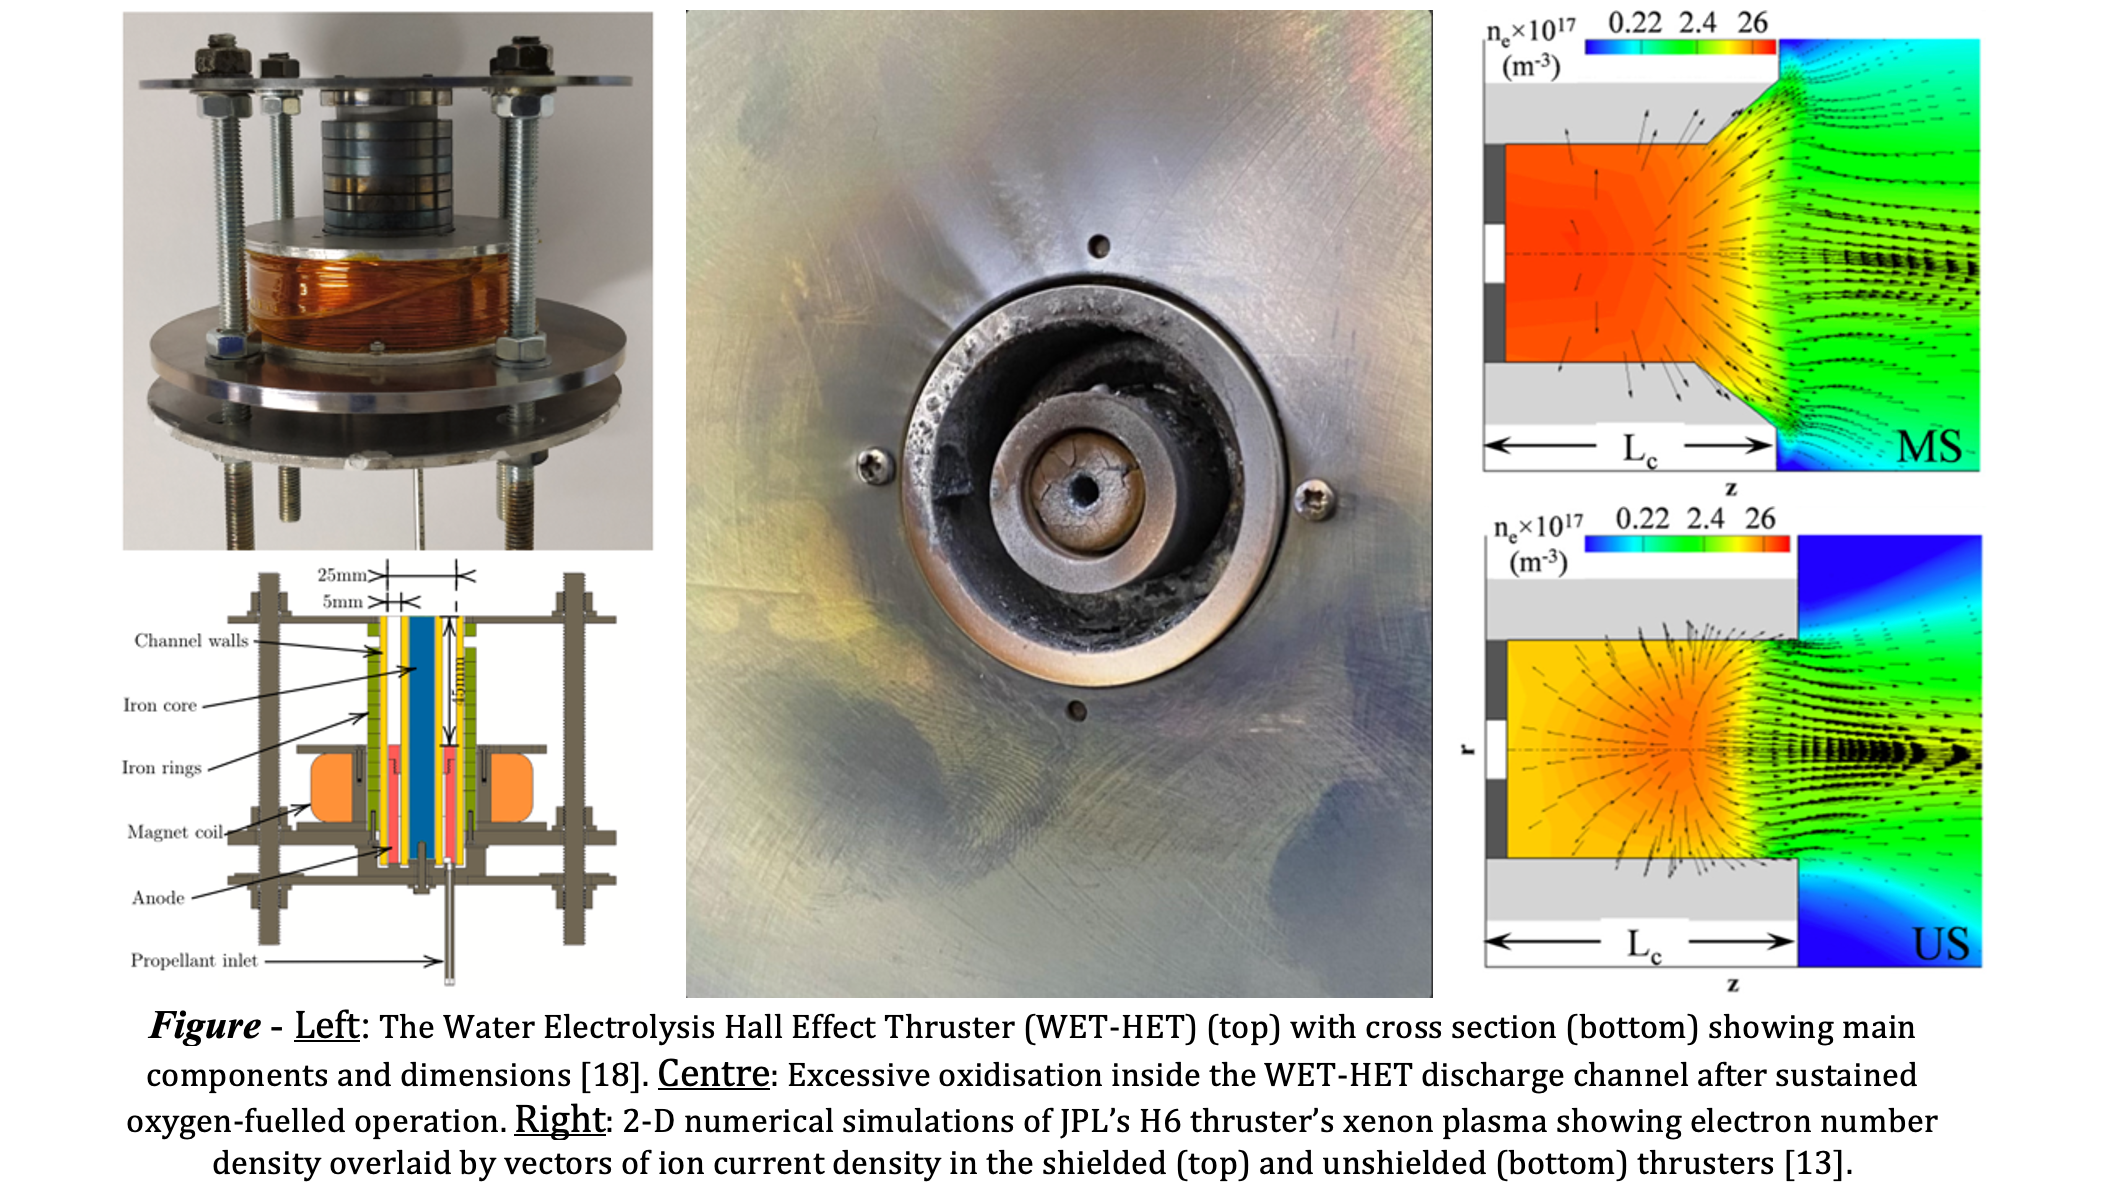 Magnetic shielding and Novel Material Analysis to combat Excessive Oxidisation in a Water Electrolysis Hall Effect Thruster (WET-HET)